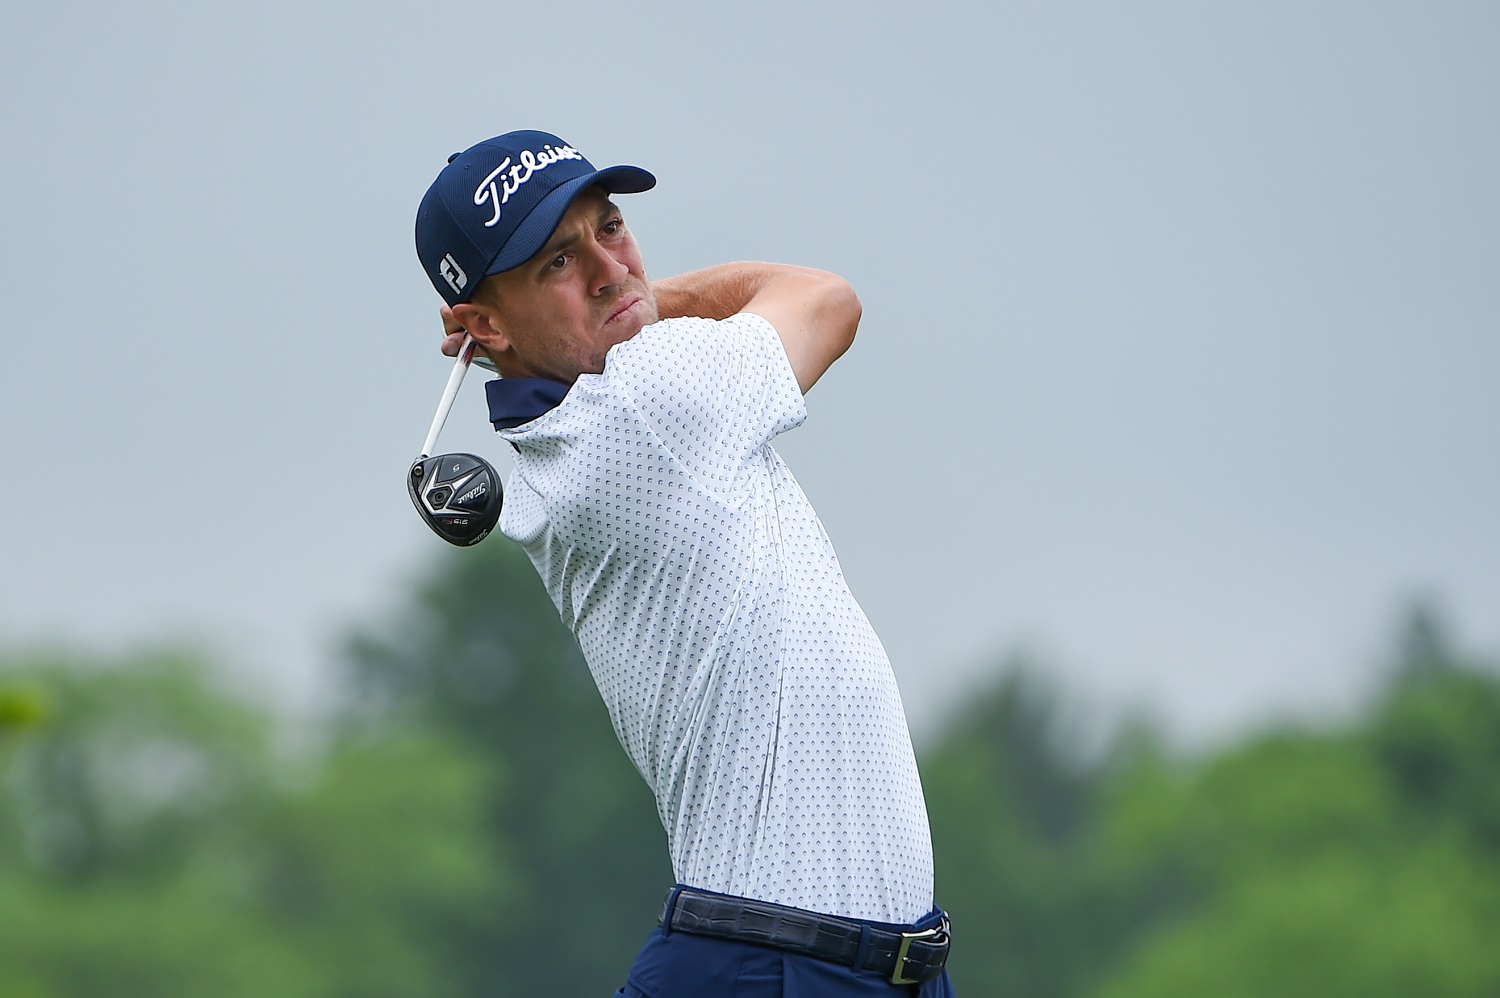 Justin Thomas tracks his tee shot on the fifth hole during the opening round of the Memorial Tournament at Muirfield Village Golf Club. | Ken Murray/Icon Sportswire via Getty Images